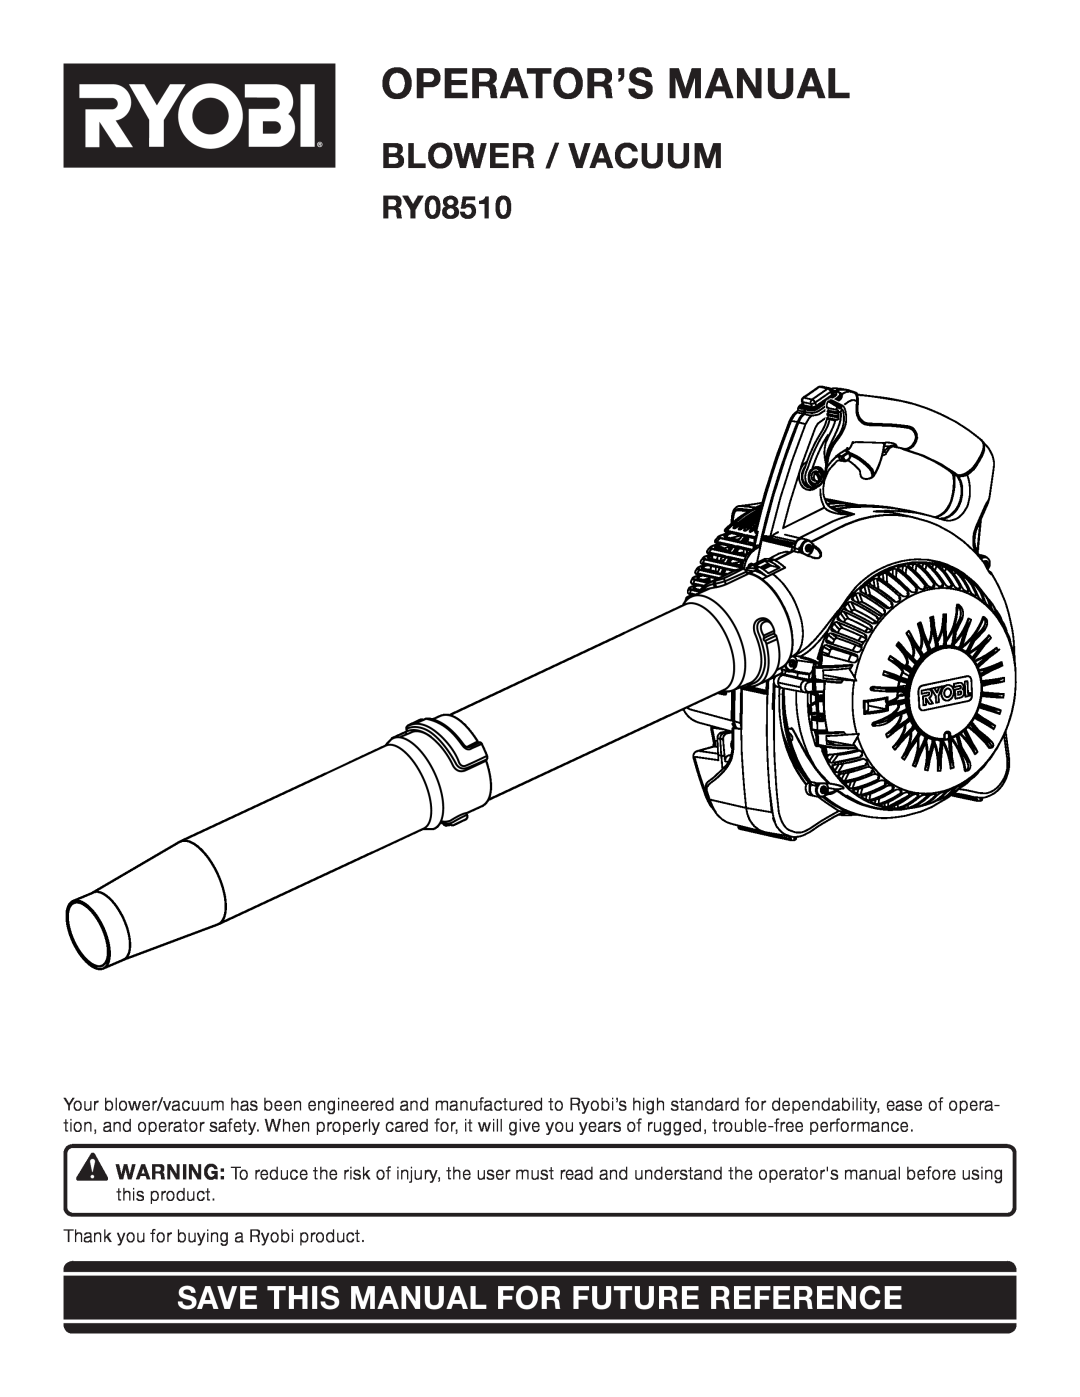 Ryobi RY08510 manual Operator’S Manual, Blower / Vacuum, Save This Manual For Future Reference 